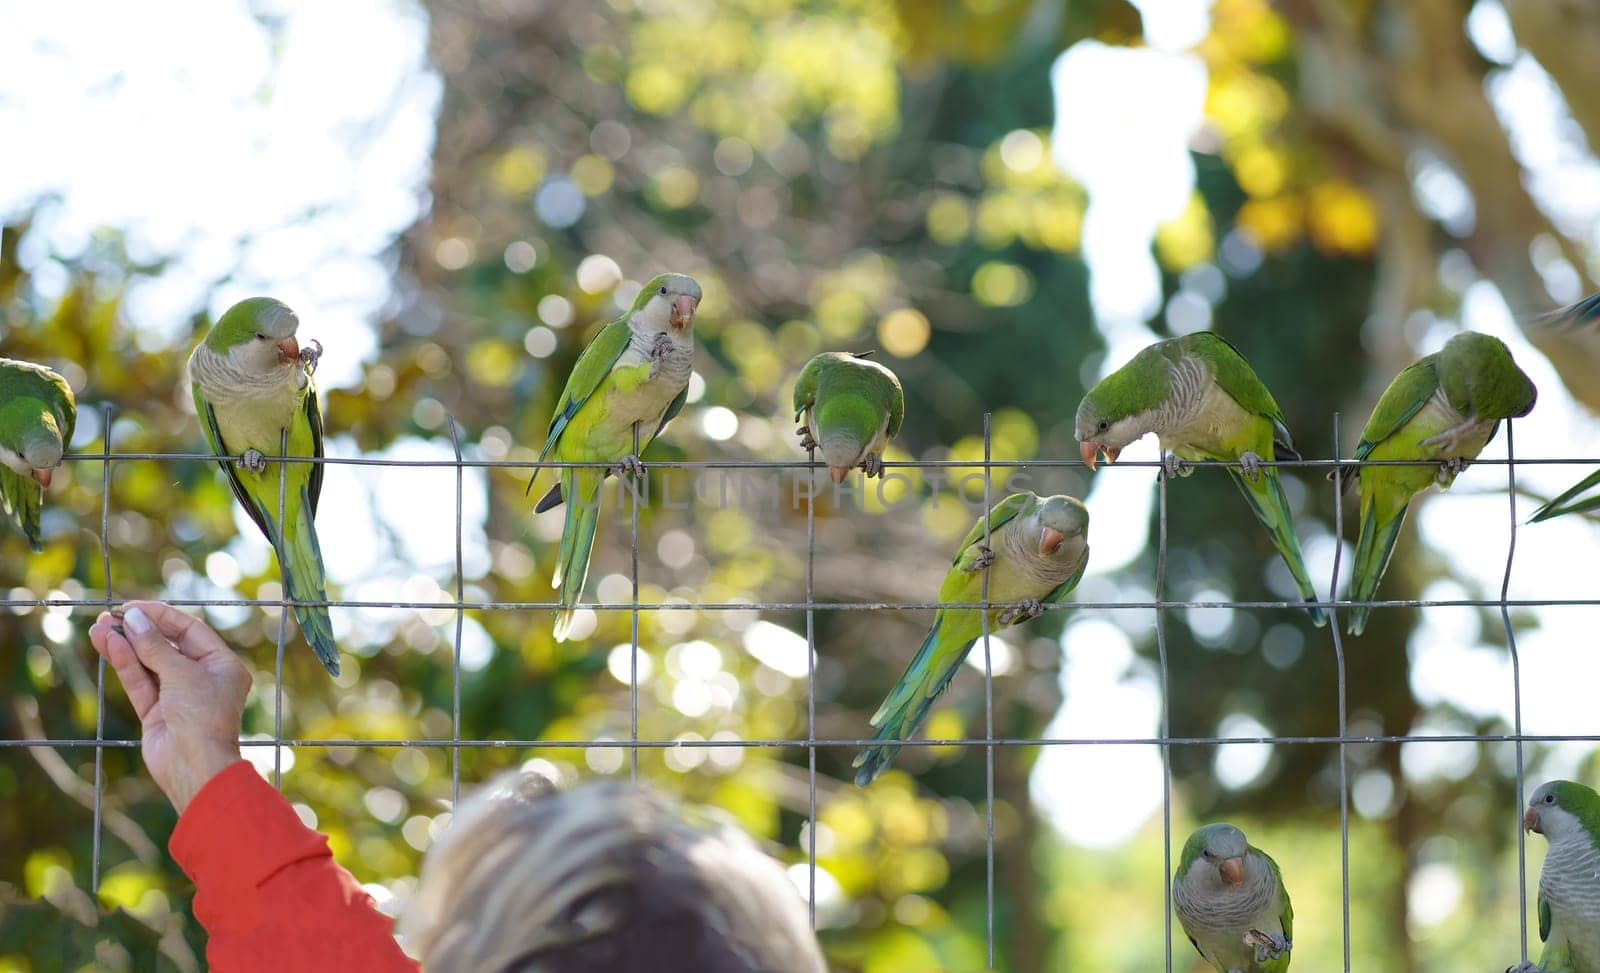 Barcelona. City Park. People feed parrots. Interaction between people and animals in the city. Group of green parakeets on a mesh fence and the hand of a man feeding them by aprilphoto